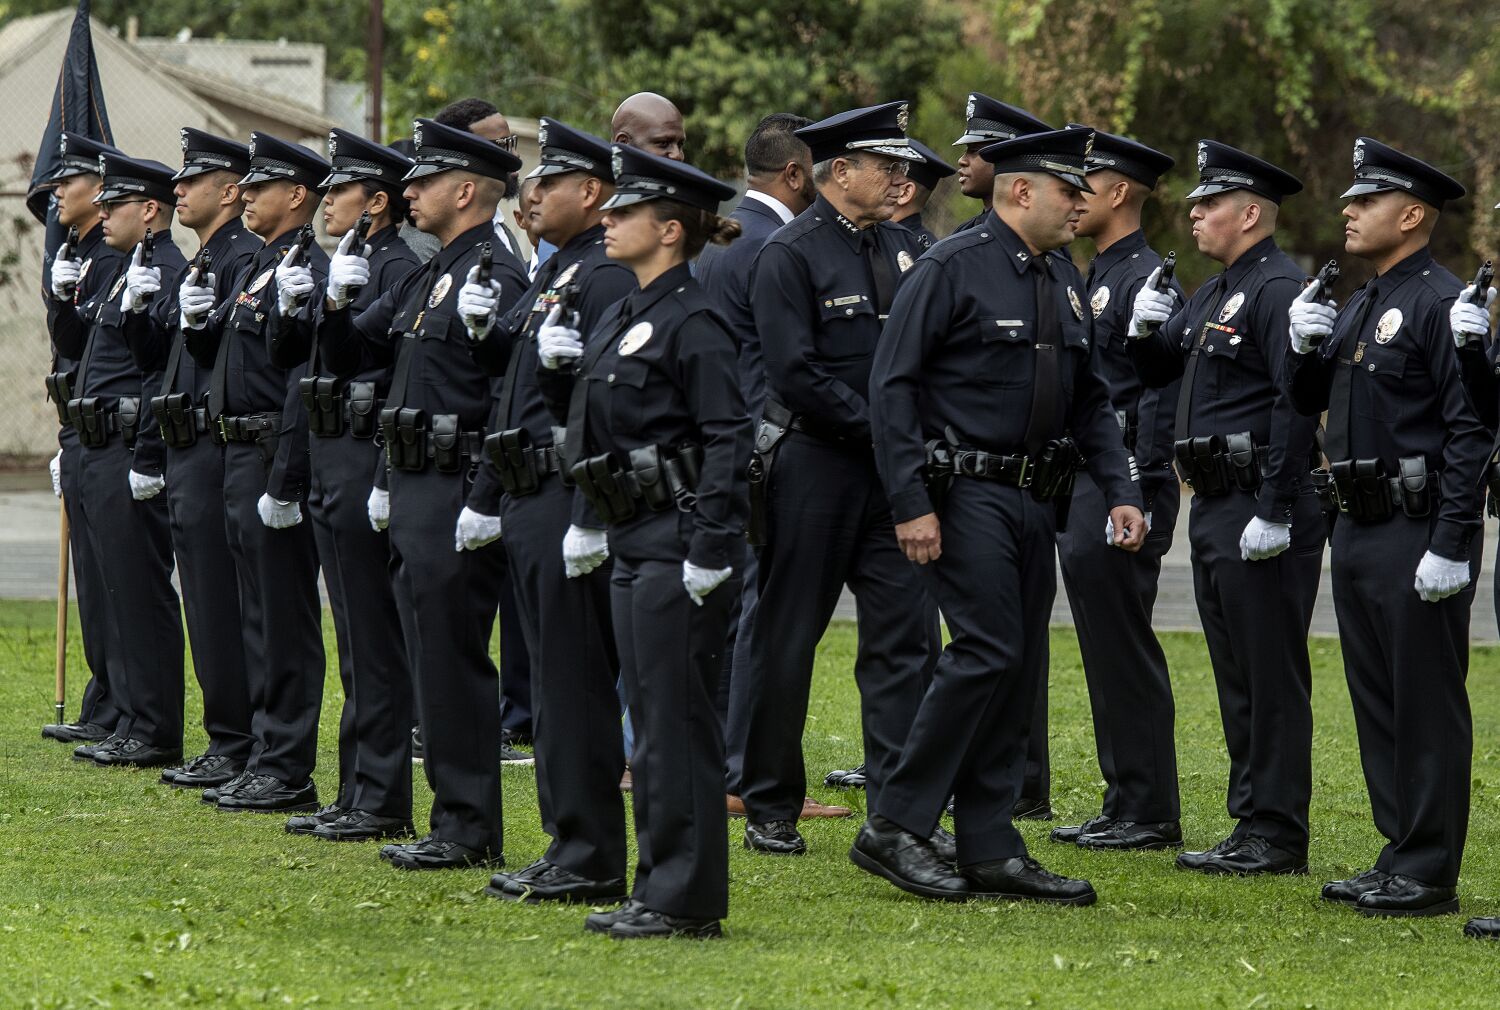 LAPD union VP tells police work in locations that “respect” you.